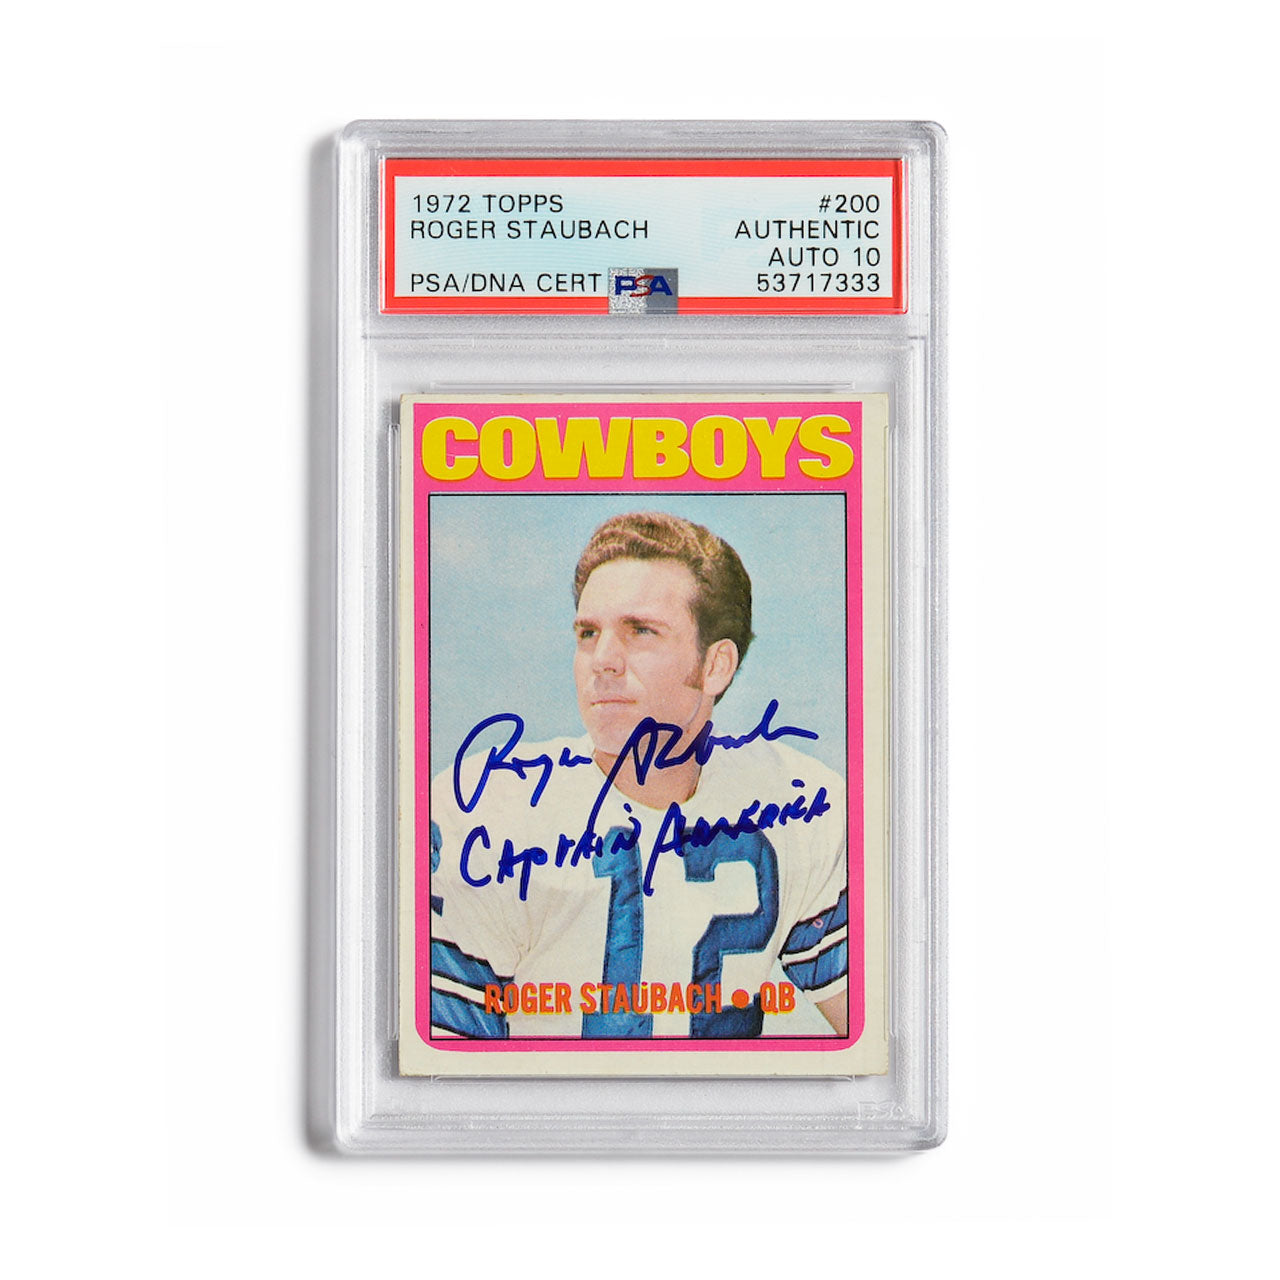 1972 Topps Roger Staubach Autographed Rookie Card